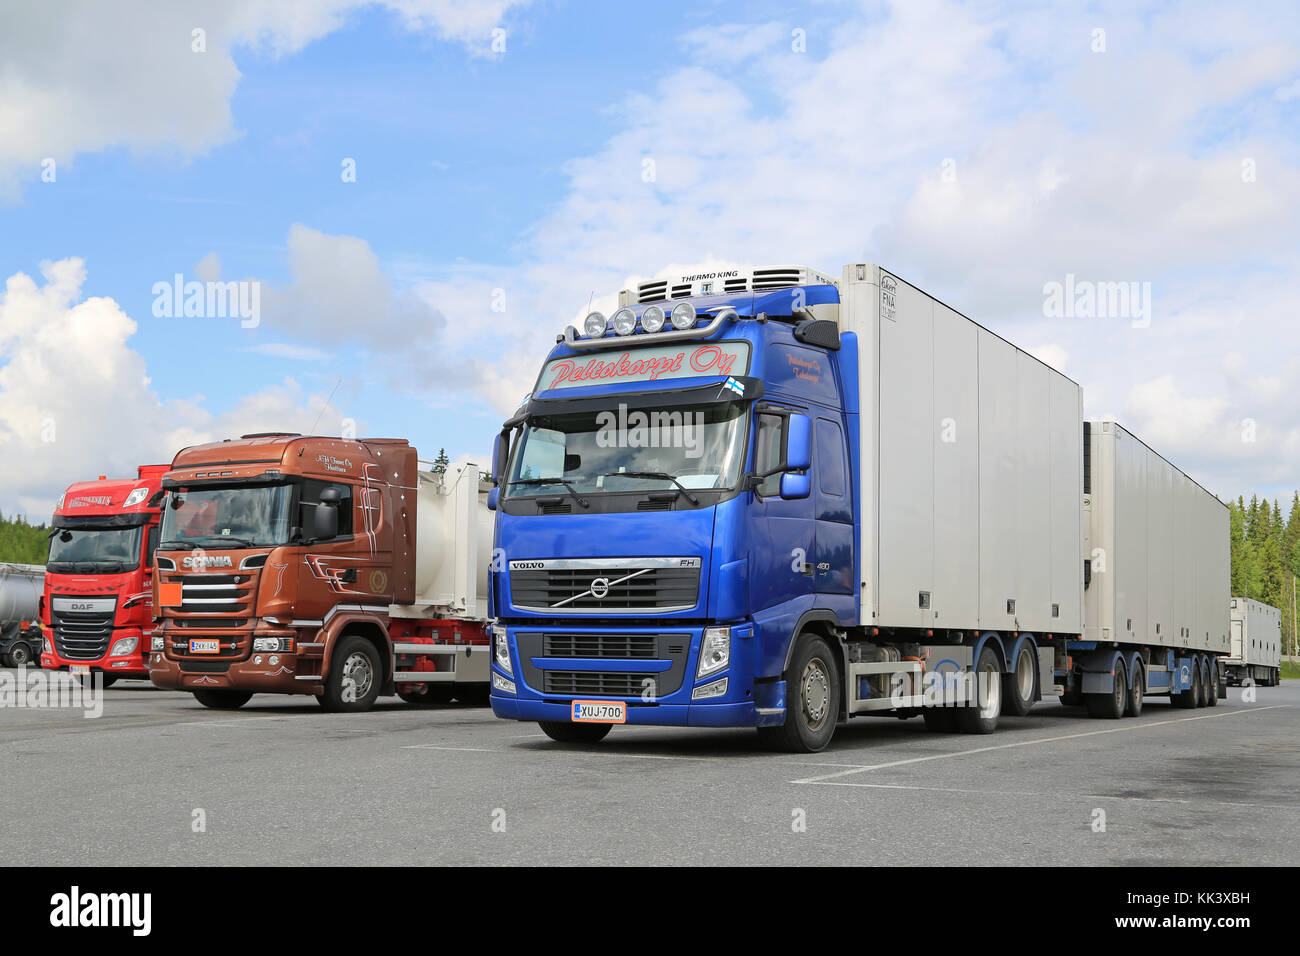 HIRVASKANGAS, FINLAND - JUNE 20, 2015: Volvo FH, Scania and DAF trucks at a truck stop on Midsummer Day. Road transport goes on throughout the Finnish Stock Photo